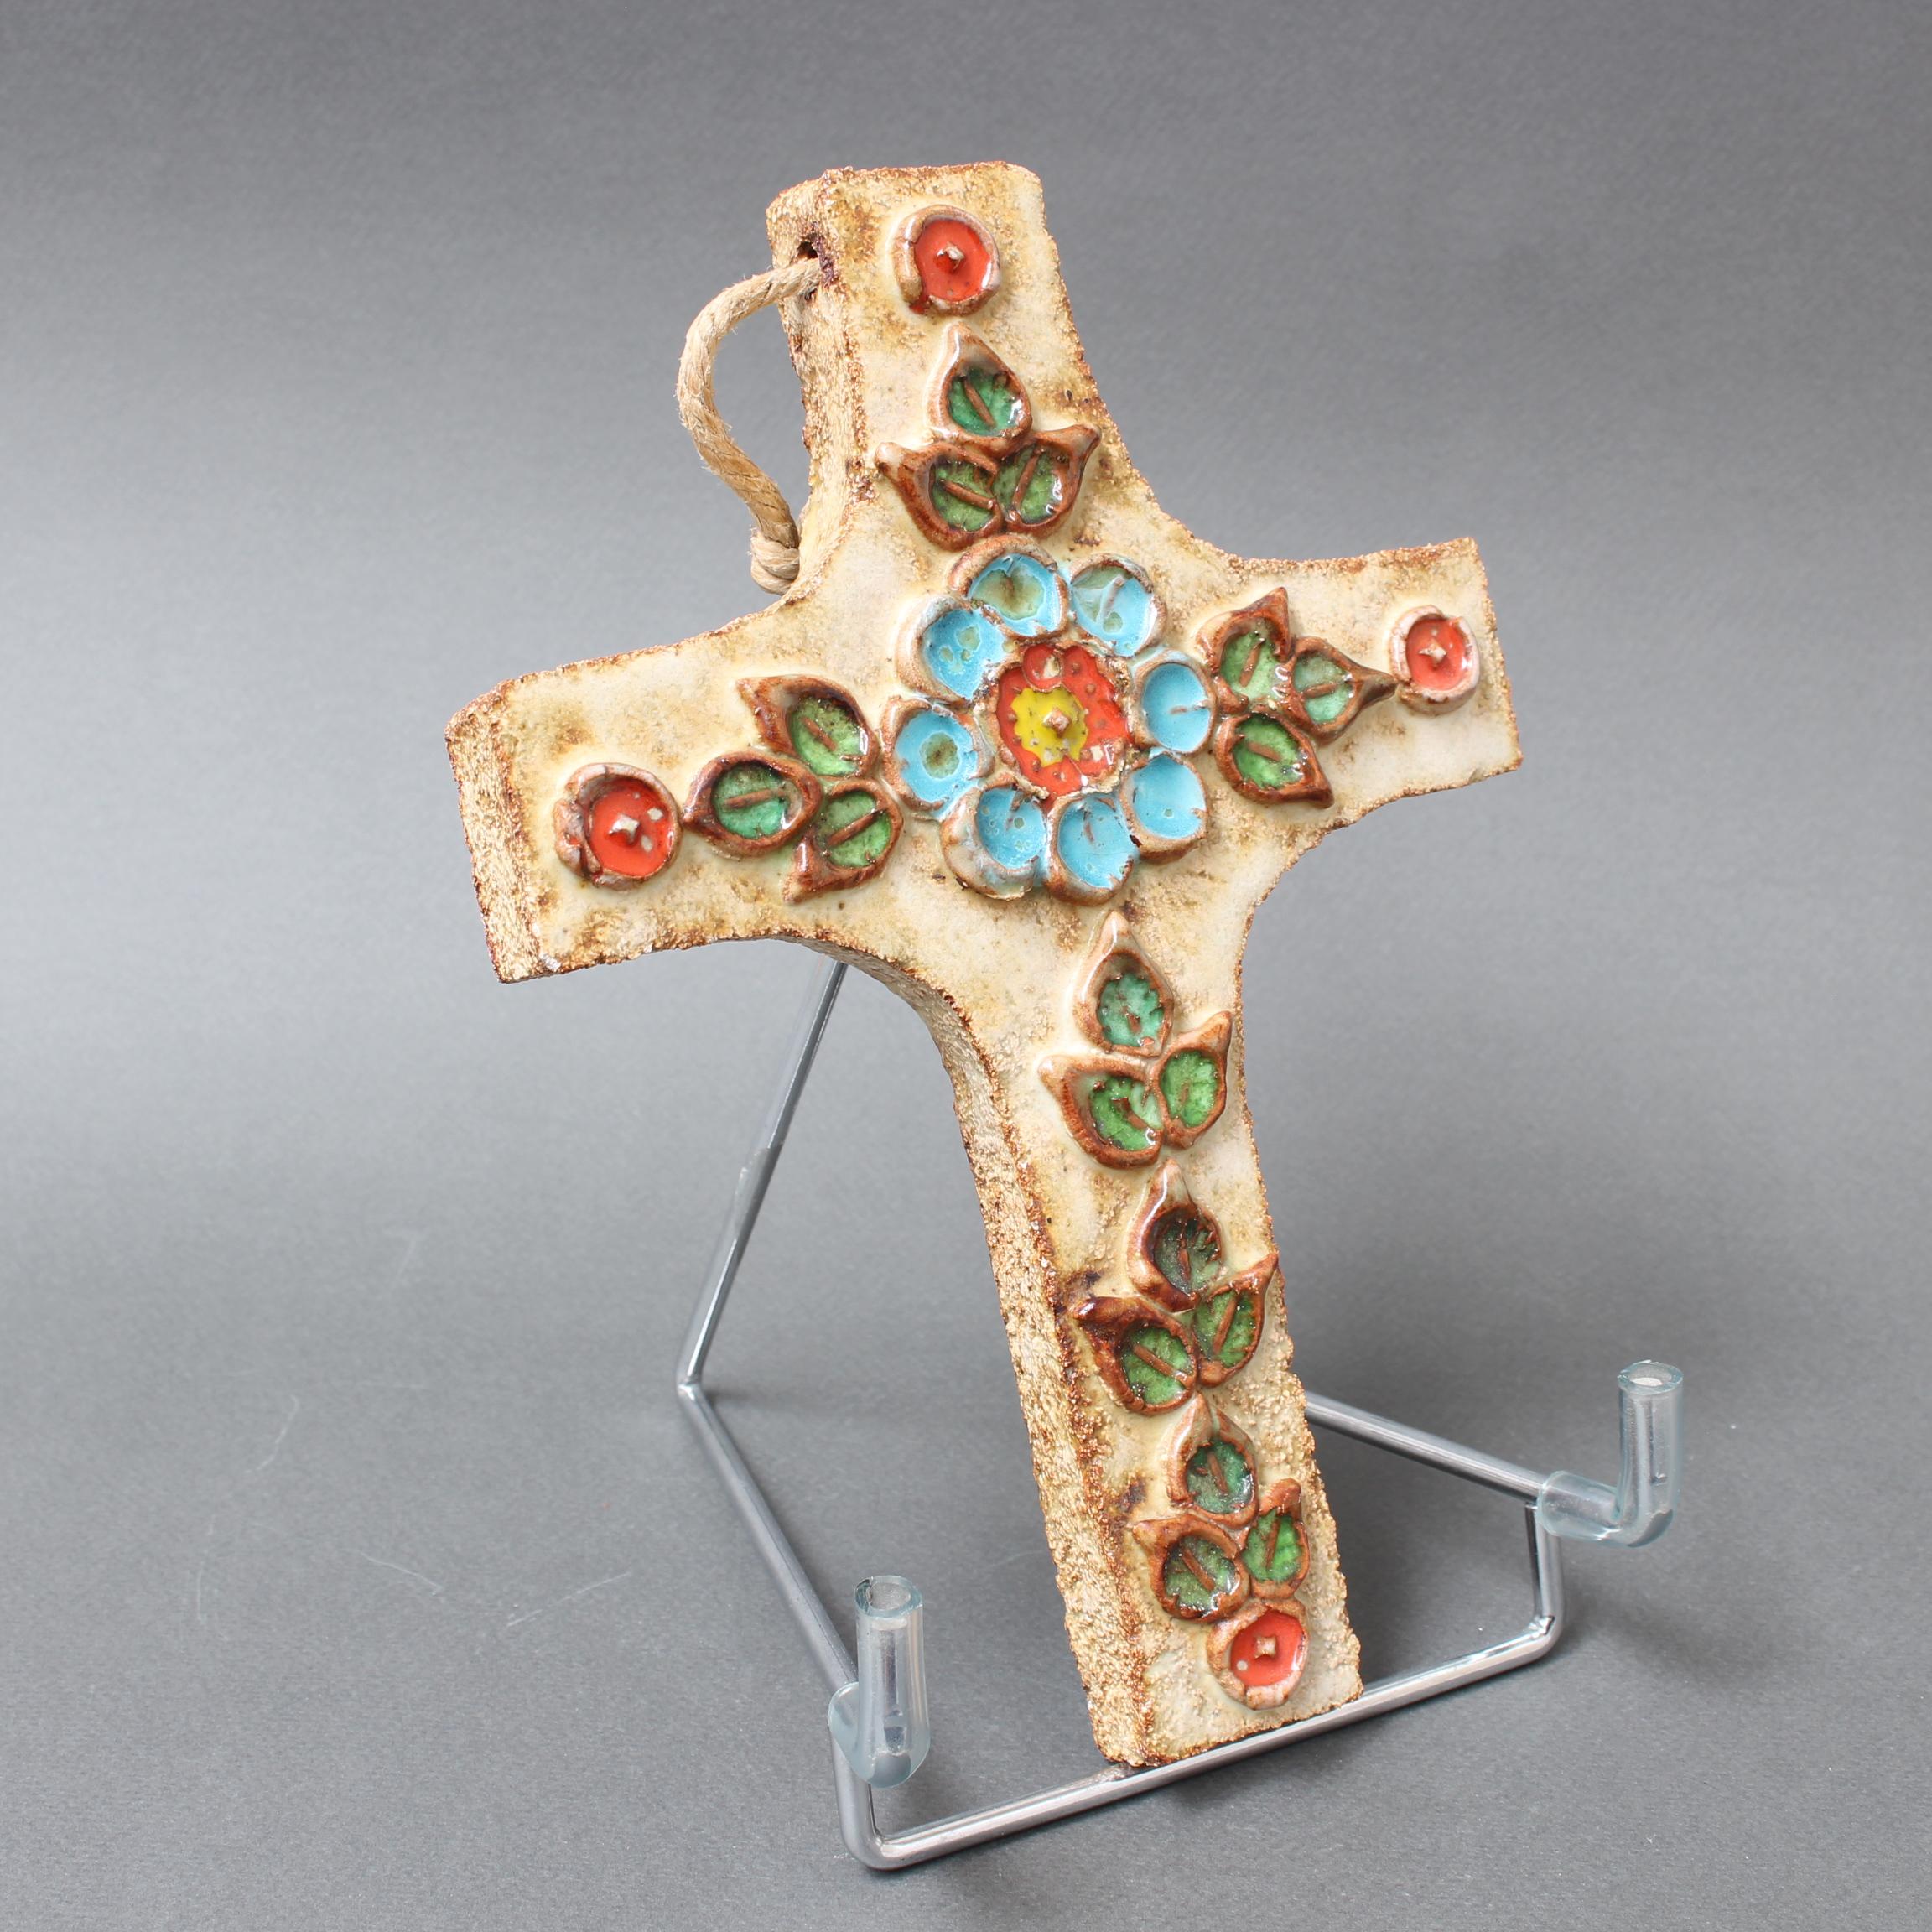 Vintage French ceramic flower-motif cross by La Roue, Vallauris, France (circa 1960s). A charming, ornamental piece with rustic and colourful details throughout. The ceramic presents a flower motif both horizontally and vertically. In good overall